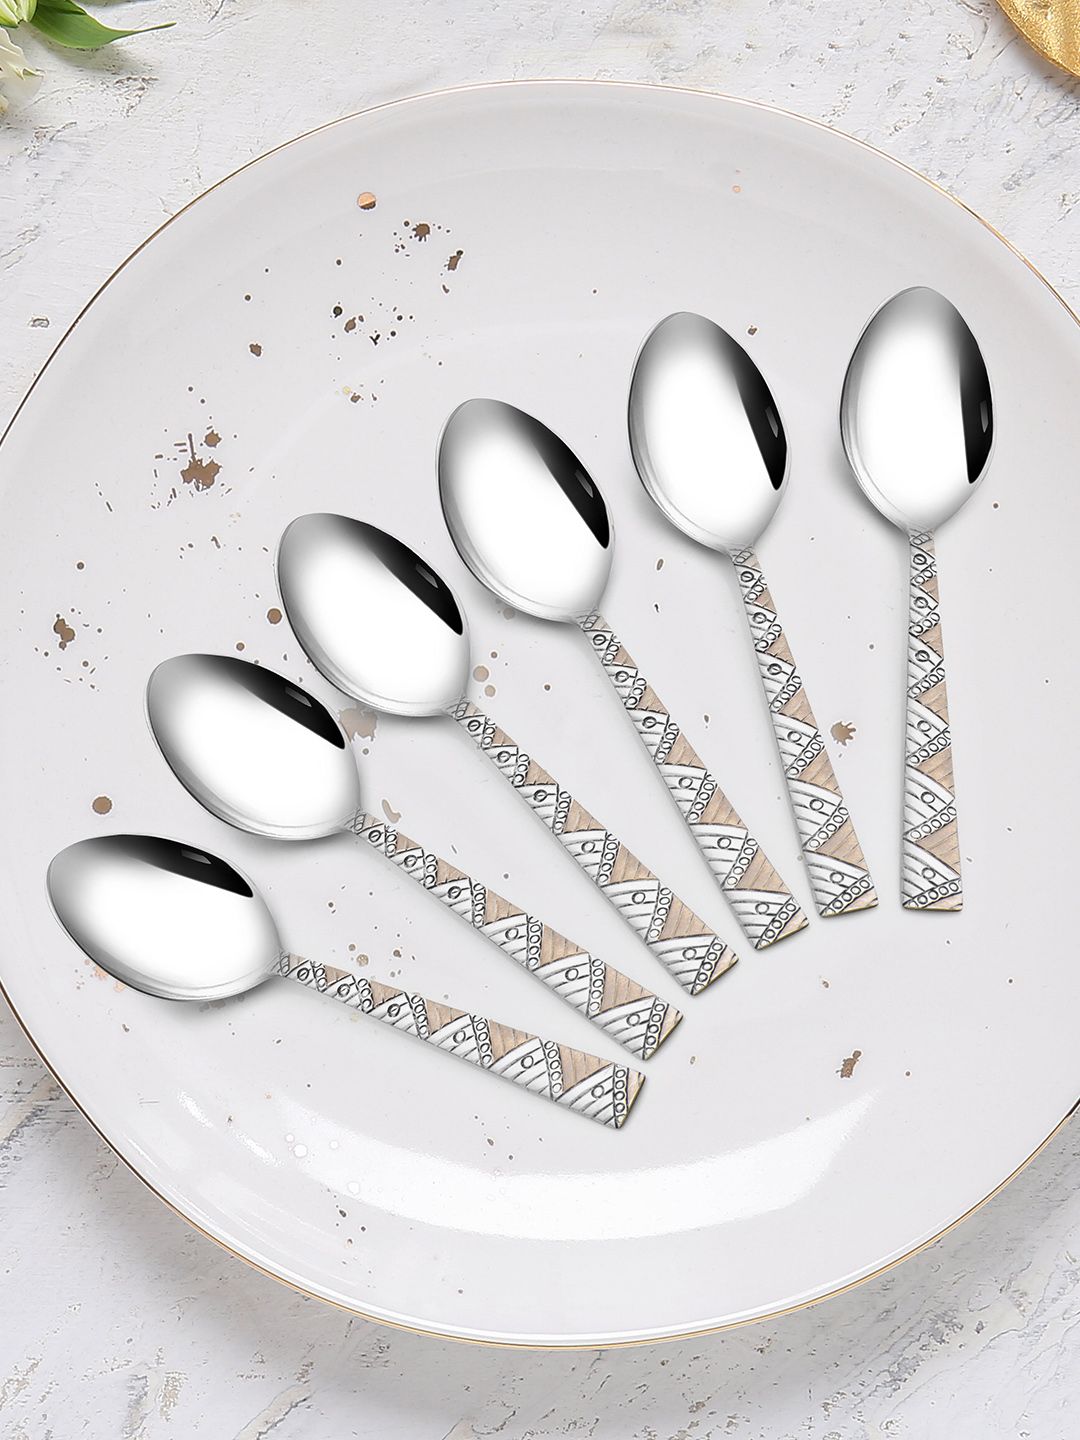 Athome by Nilkamal Set of 6 Silver-Toned Textured Tea Spoons Price in India